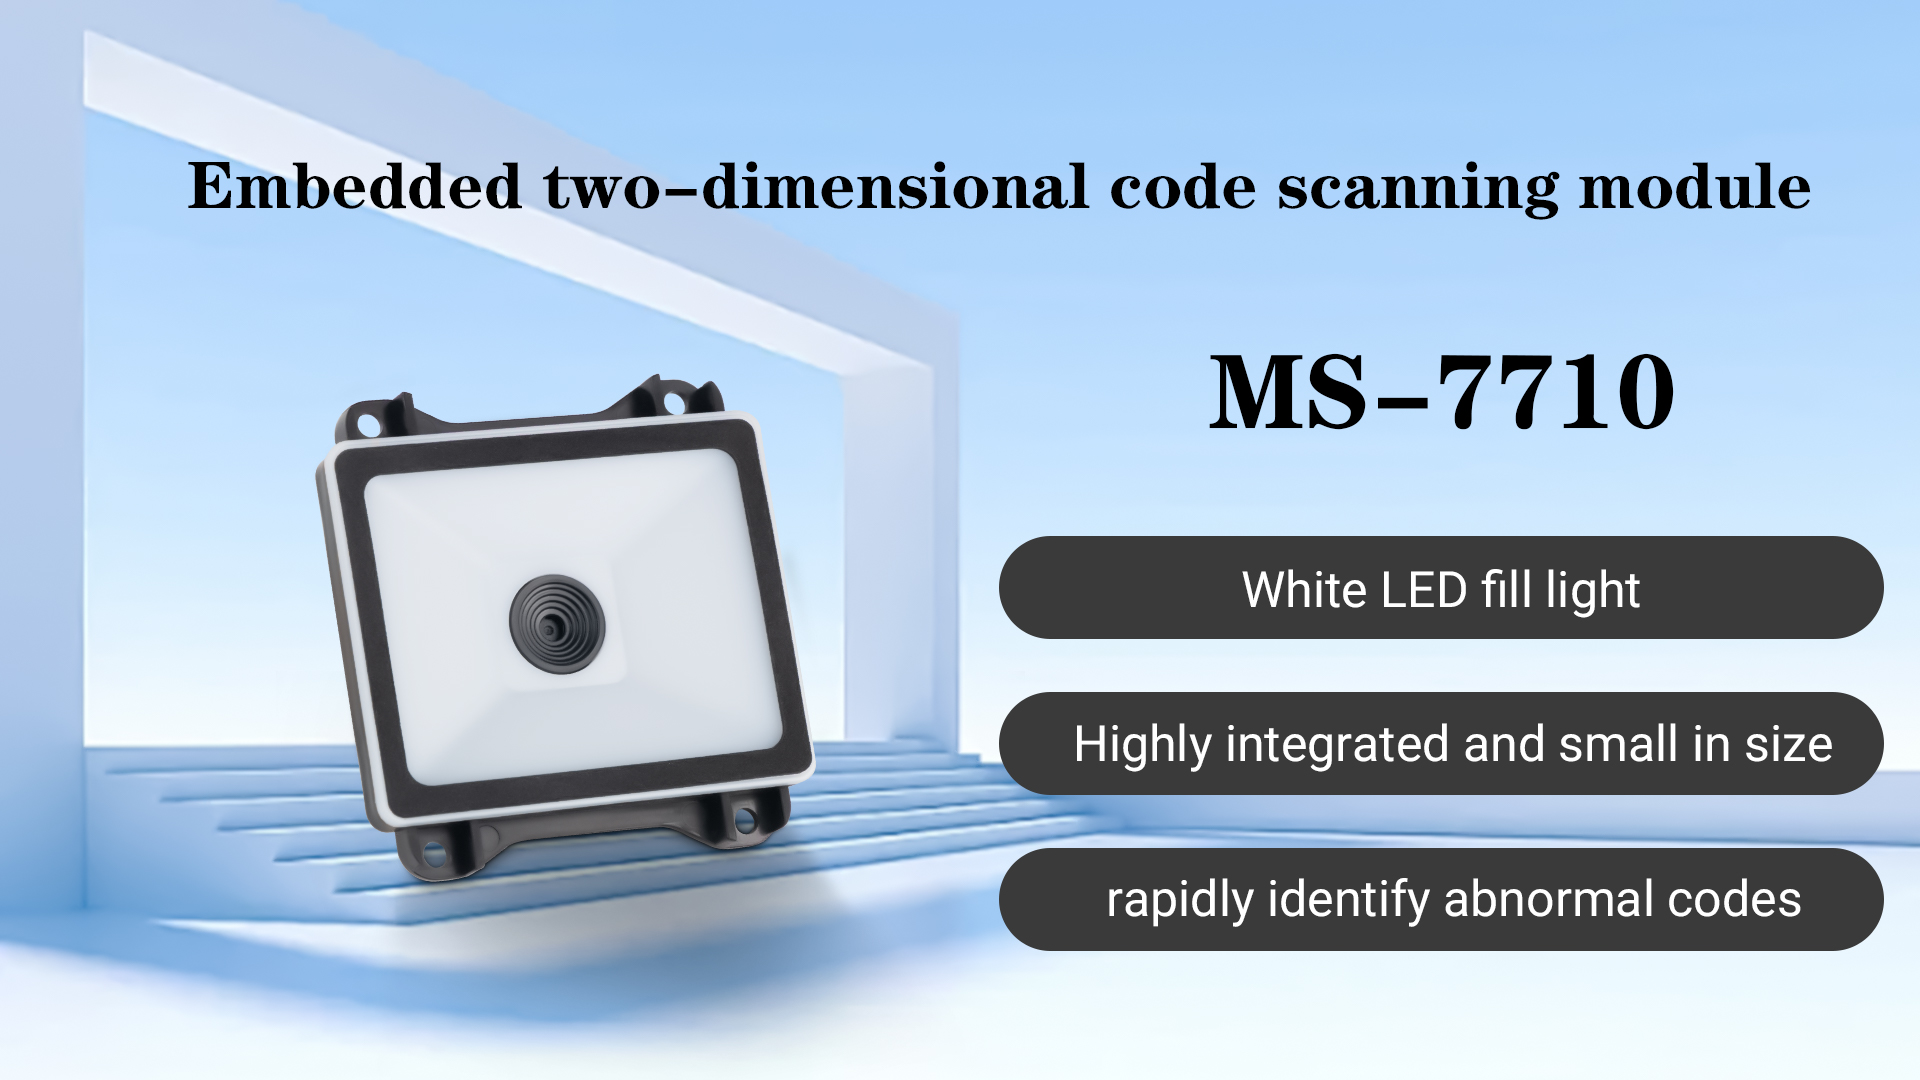 MASUNG embedded scanning module MS-7710 is used in bank QR code verification equipment